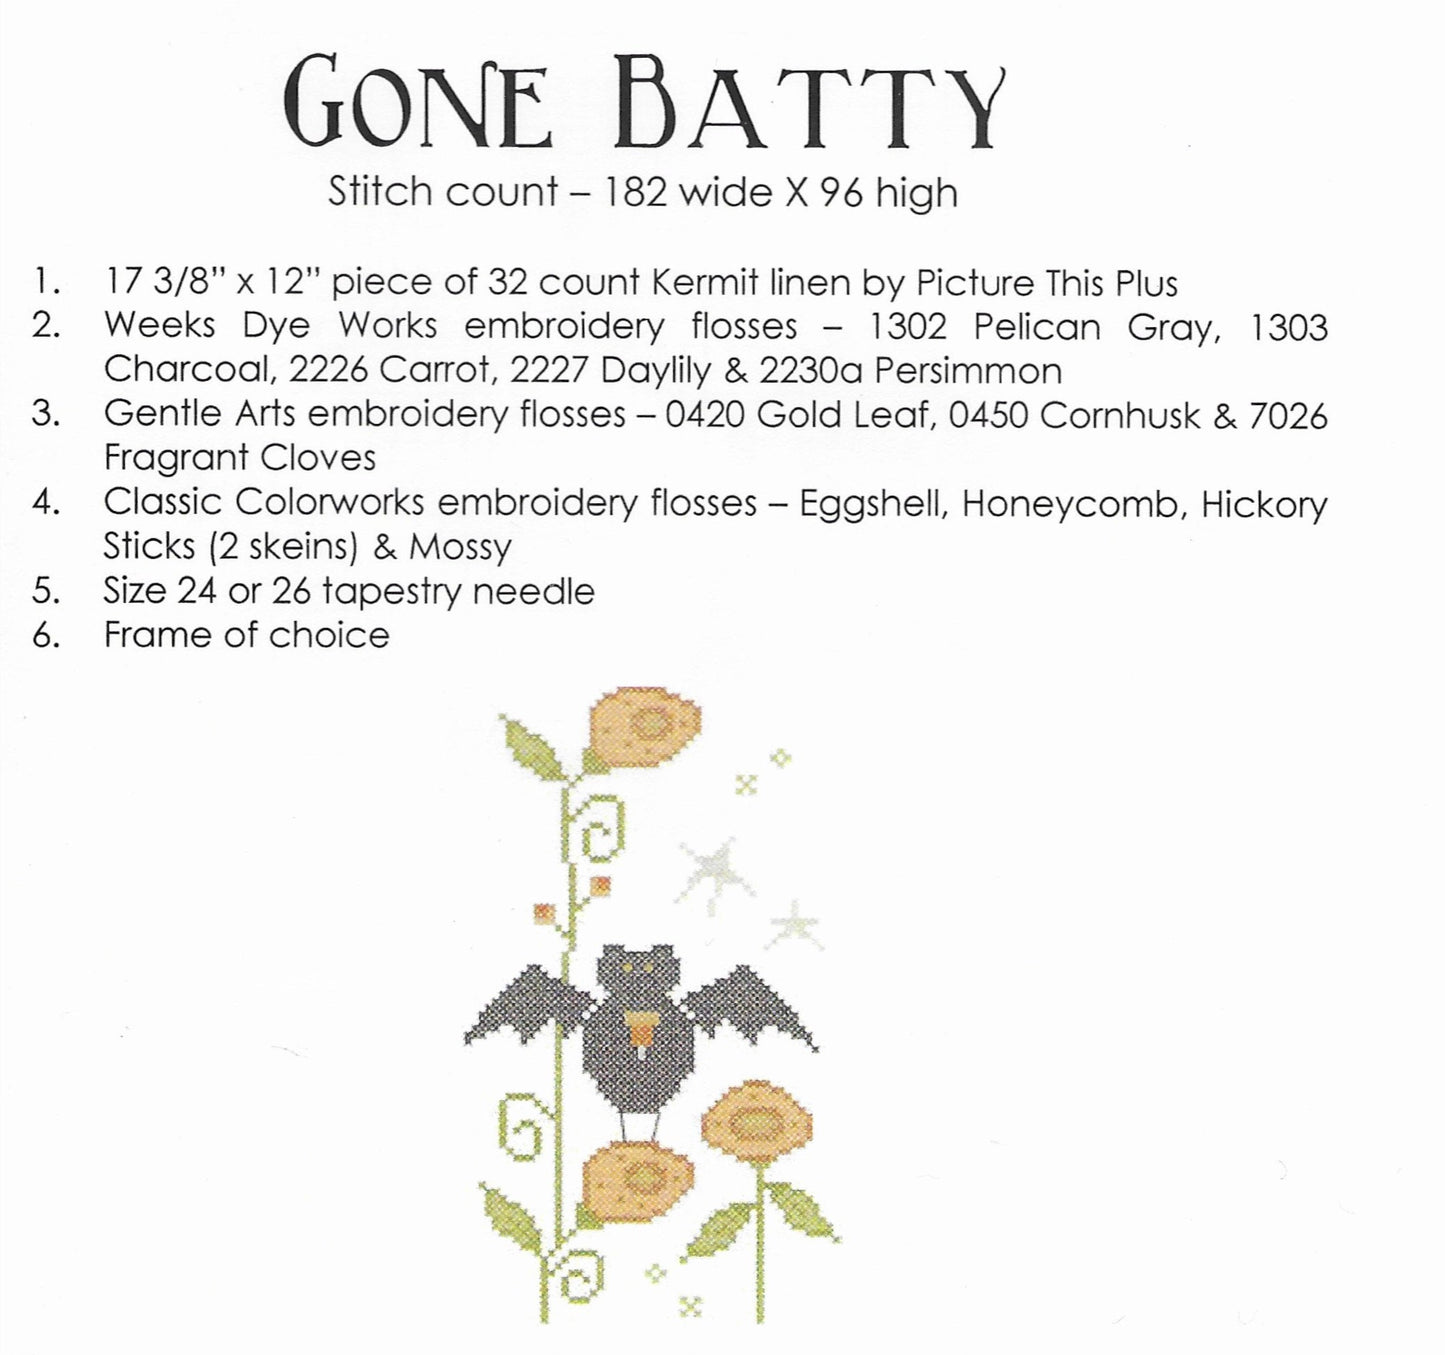 Gone Batty! Halloween Cross Stitch Embroidery Kit from Brenda Gervais for With Thy Needle & Thread: Pattern, Linen, Floss